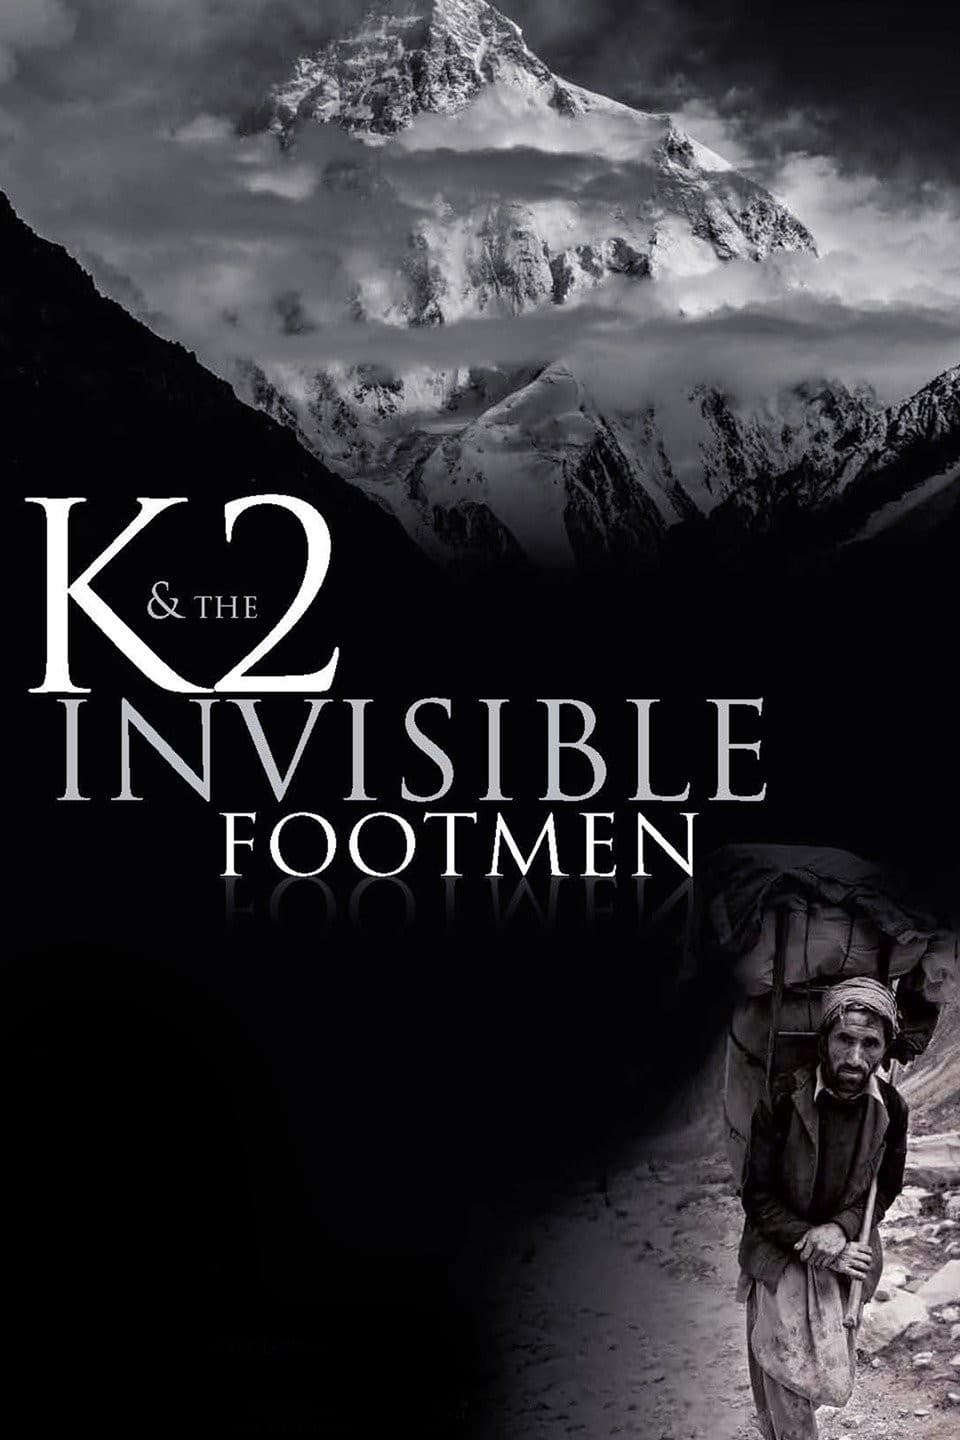 K2 & The Invisible Footmen